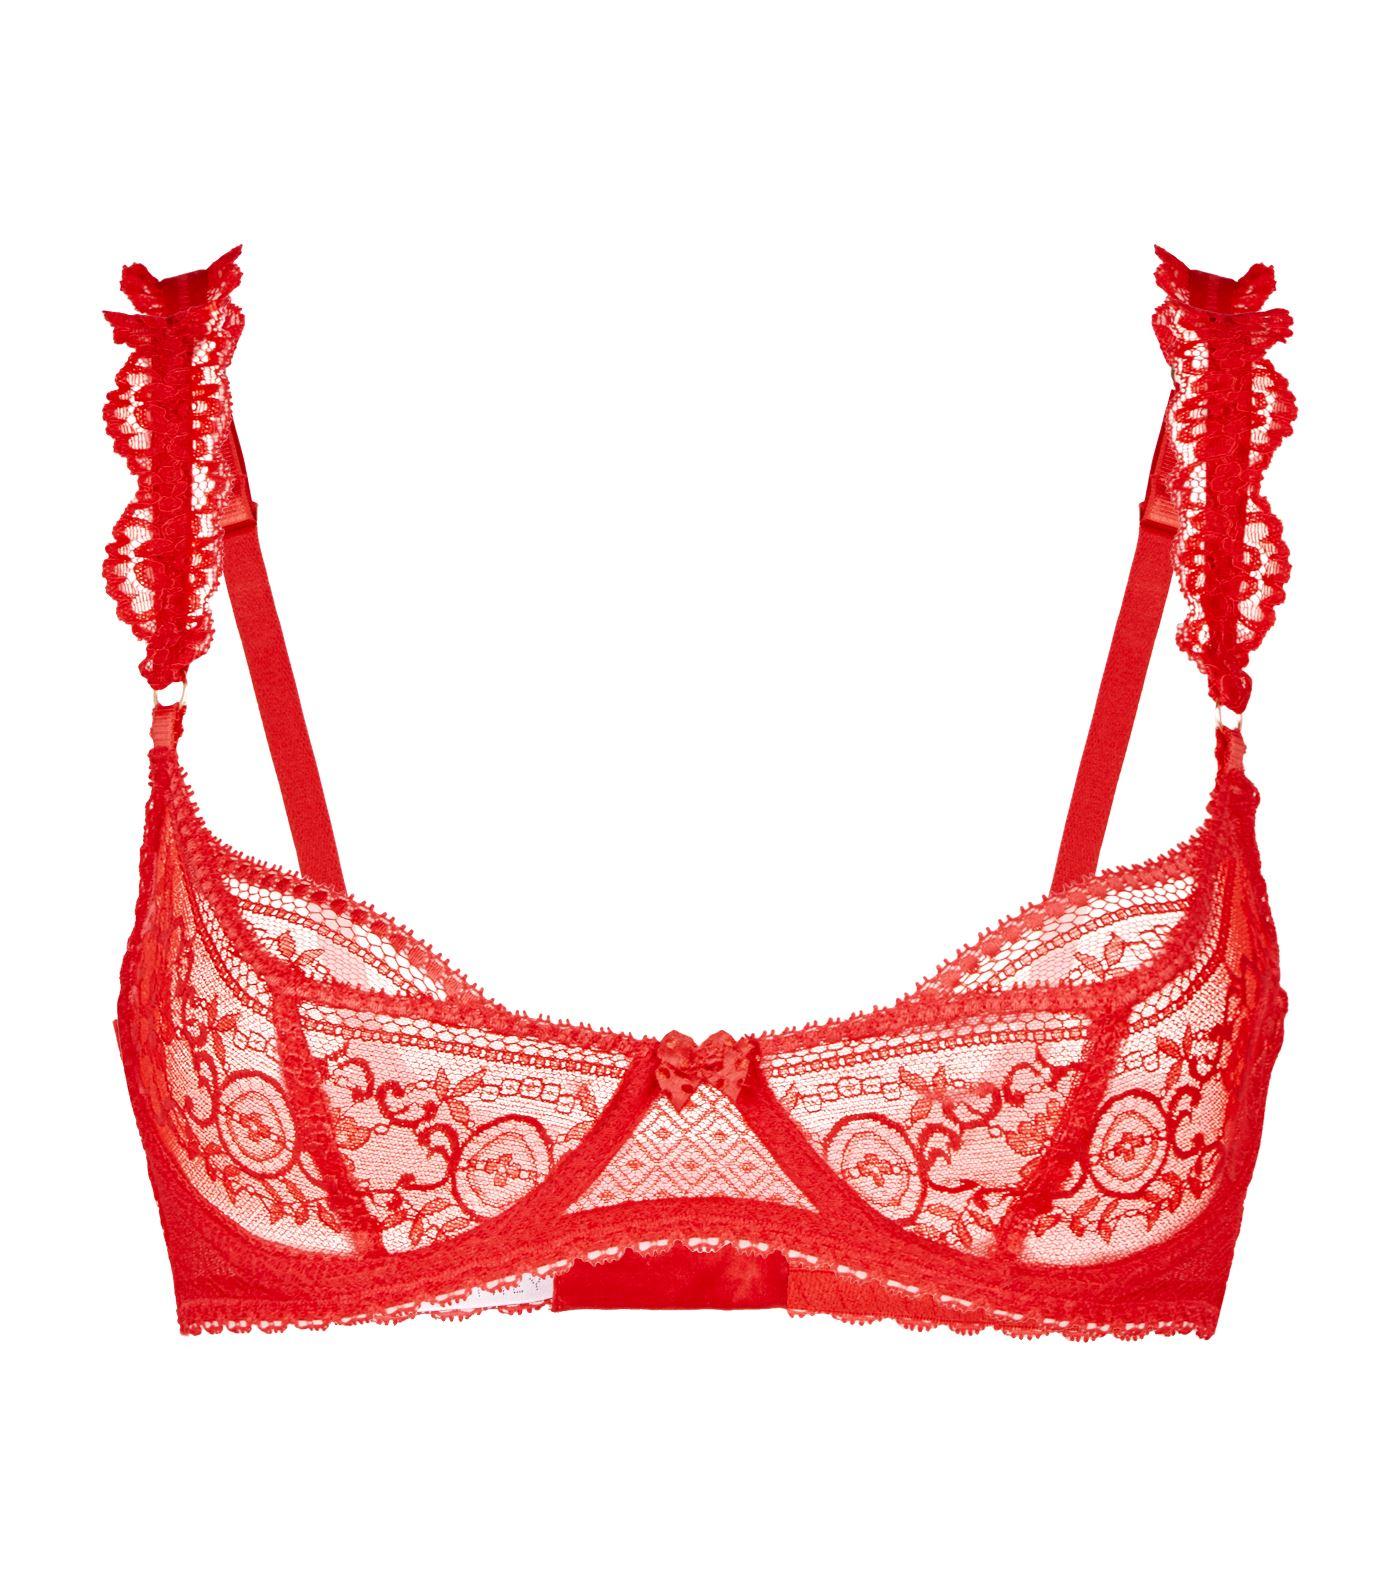 Stella McCartney Ophelia Whistling Lace Bra in Red - Lyst